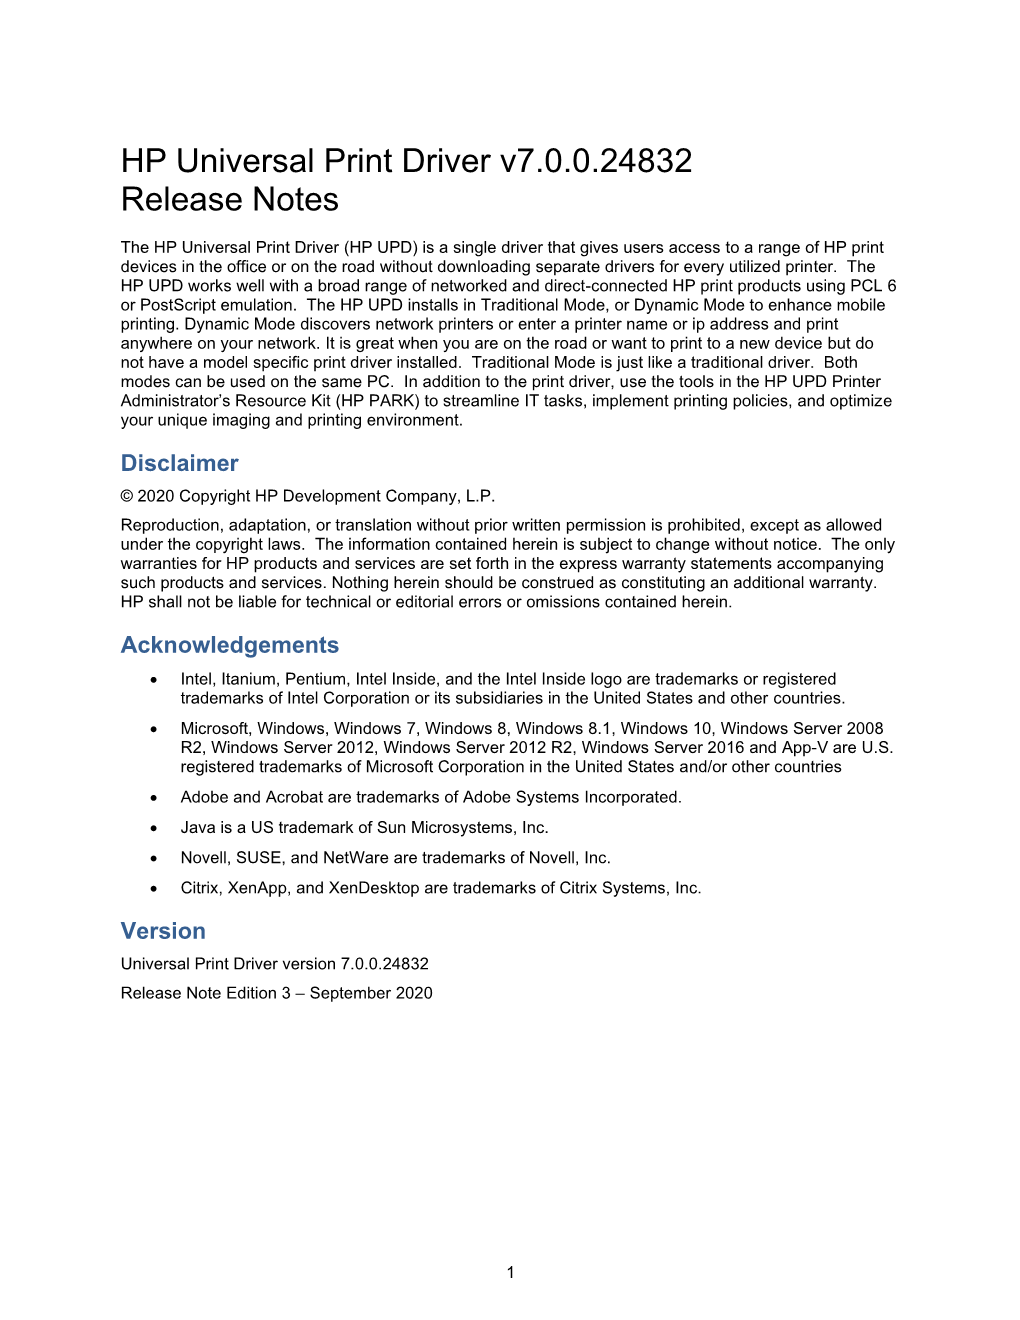 HP Universal Print Driver (UPD) Release Notes